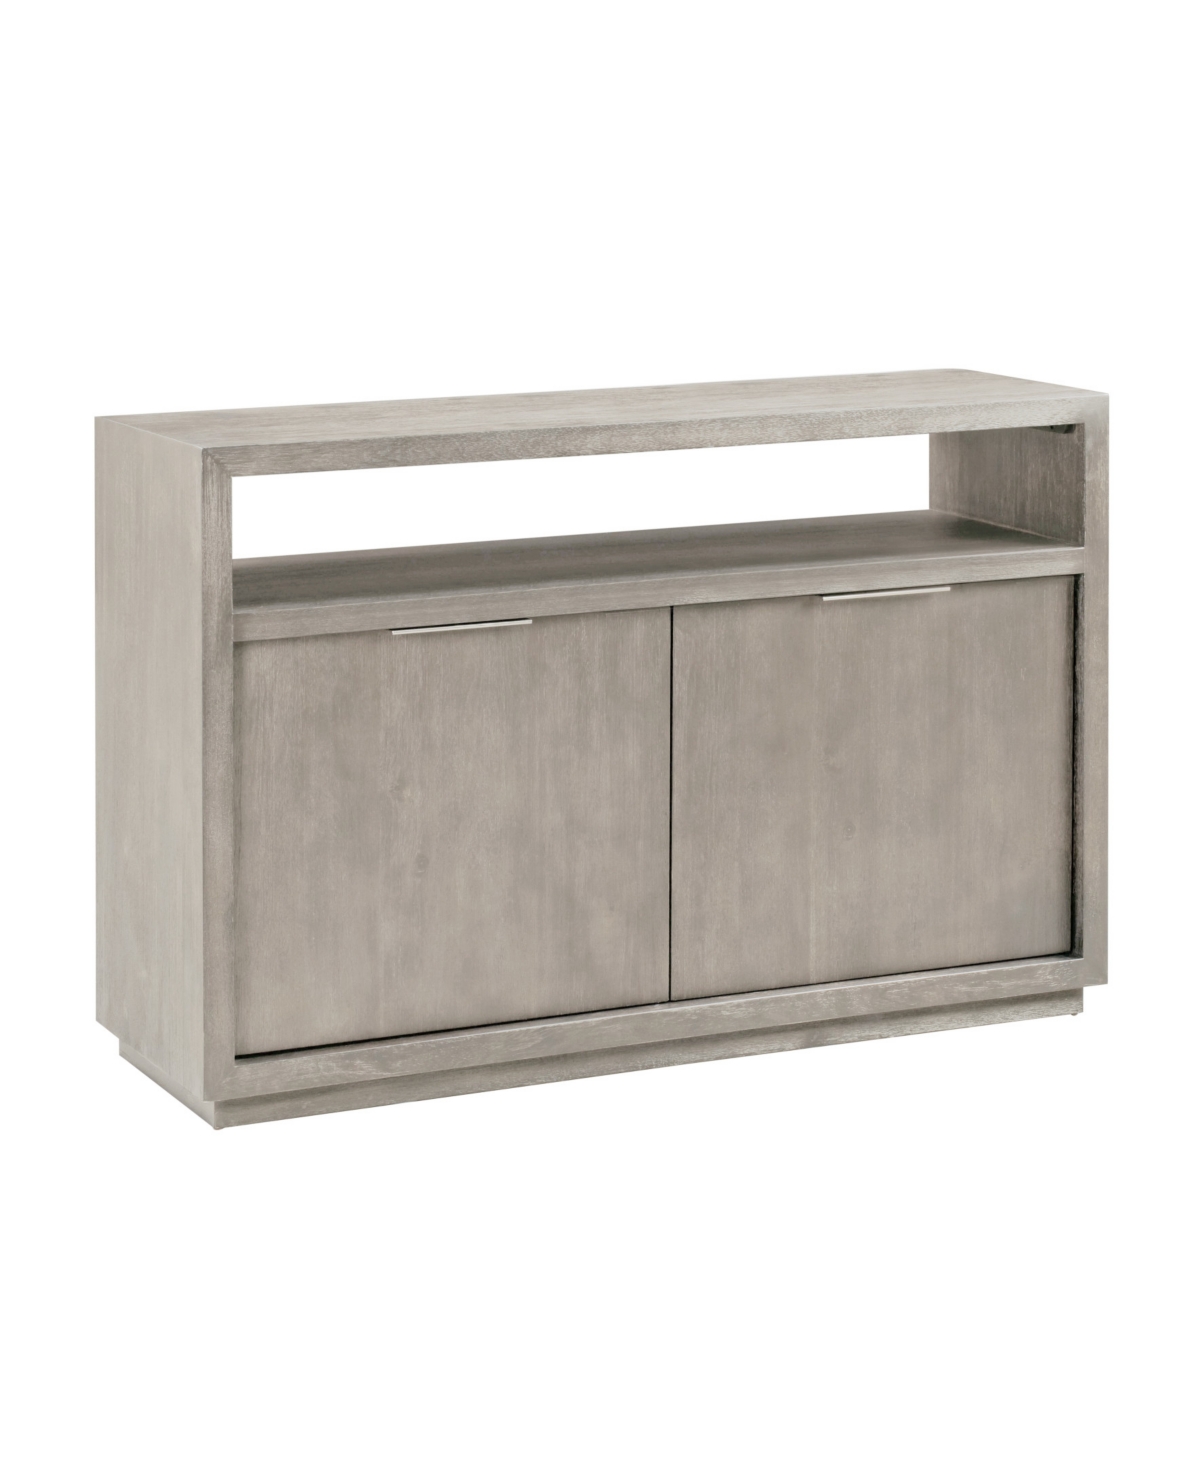 Macy's Tivie 54" Wood Entertainment Console In Mineral